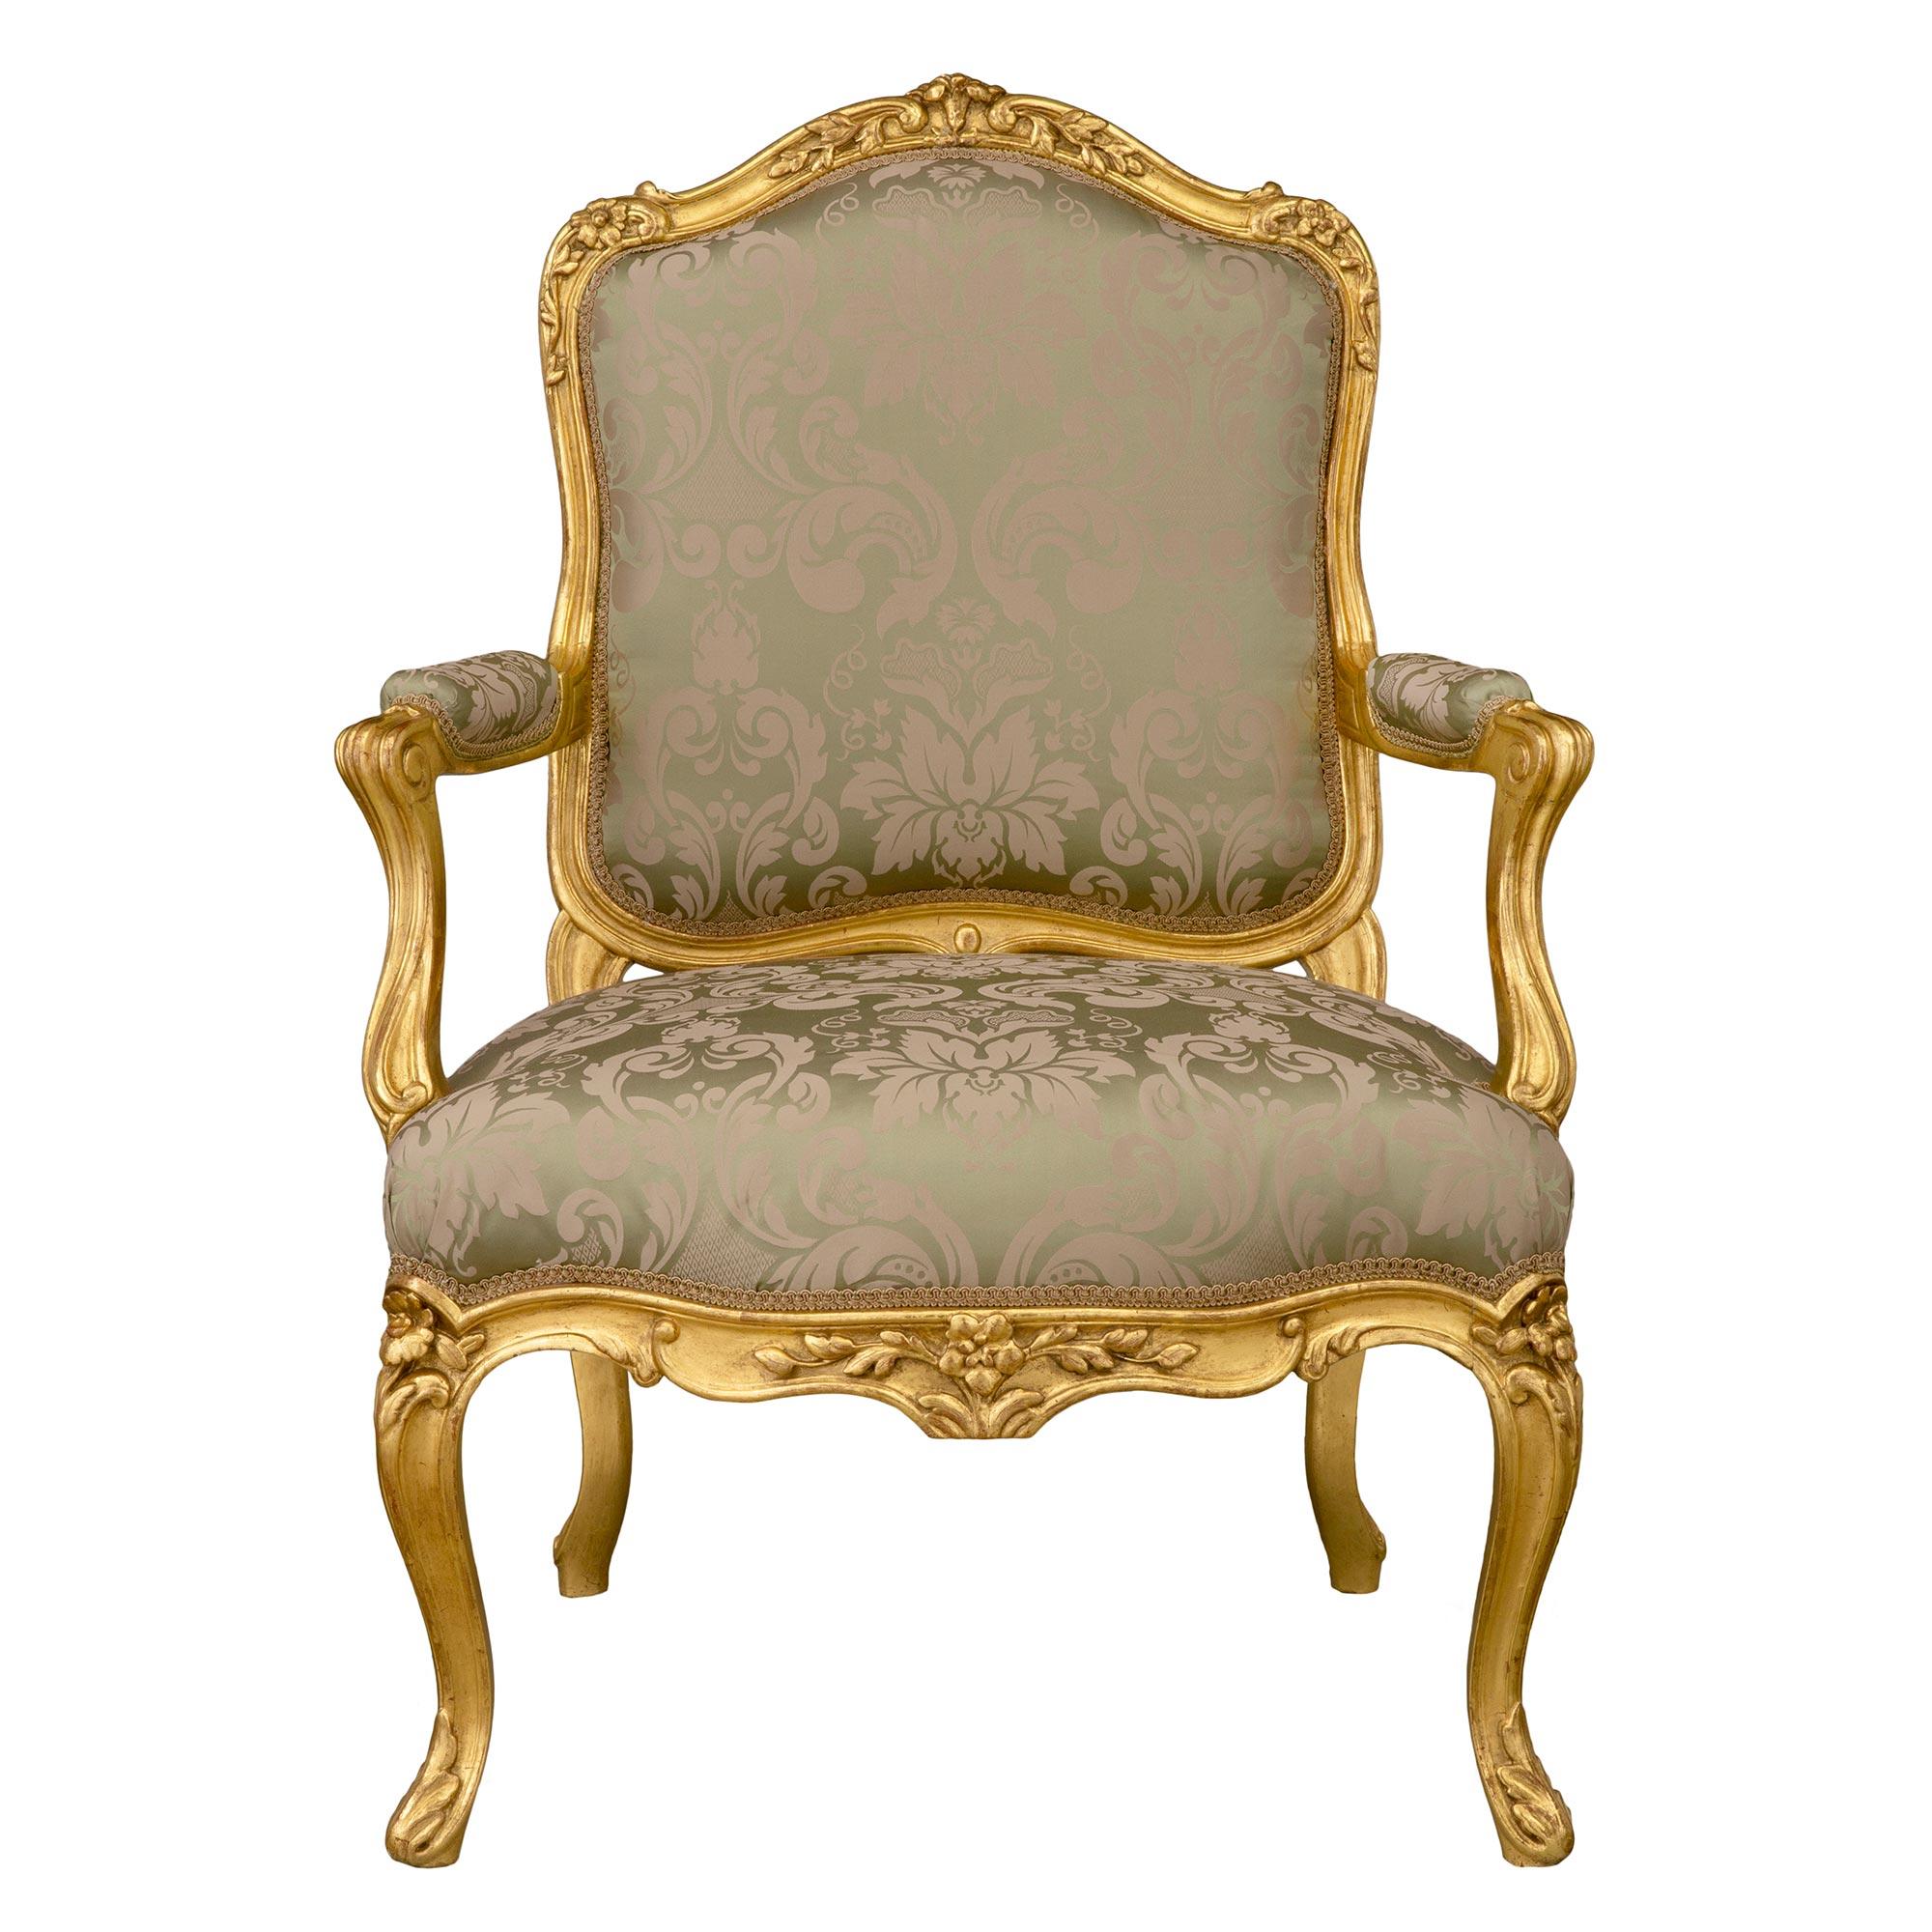 An elegant set of four French mid 19th century Louis XV st. giltwood armchairs. Each armchair is raised by beautiful cabriole legs with richly carved acanthus leaves and lovely finely detailed flowers which extend along the scallop shaped apron.